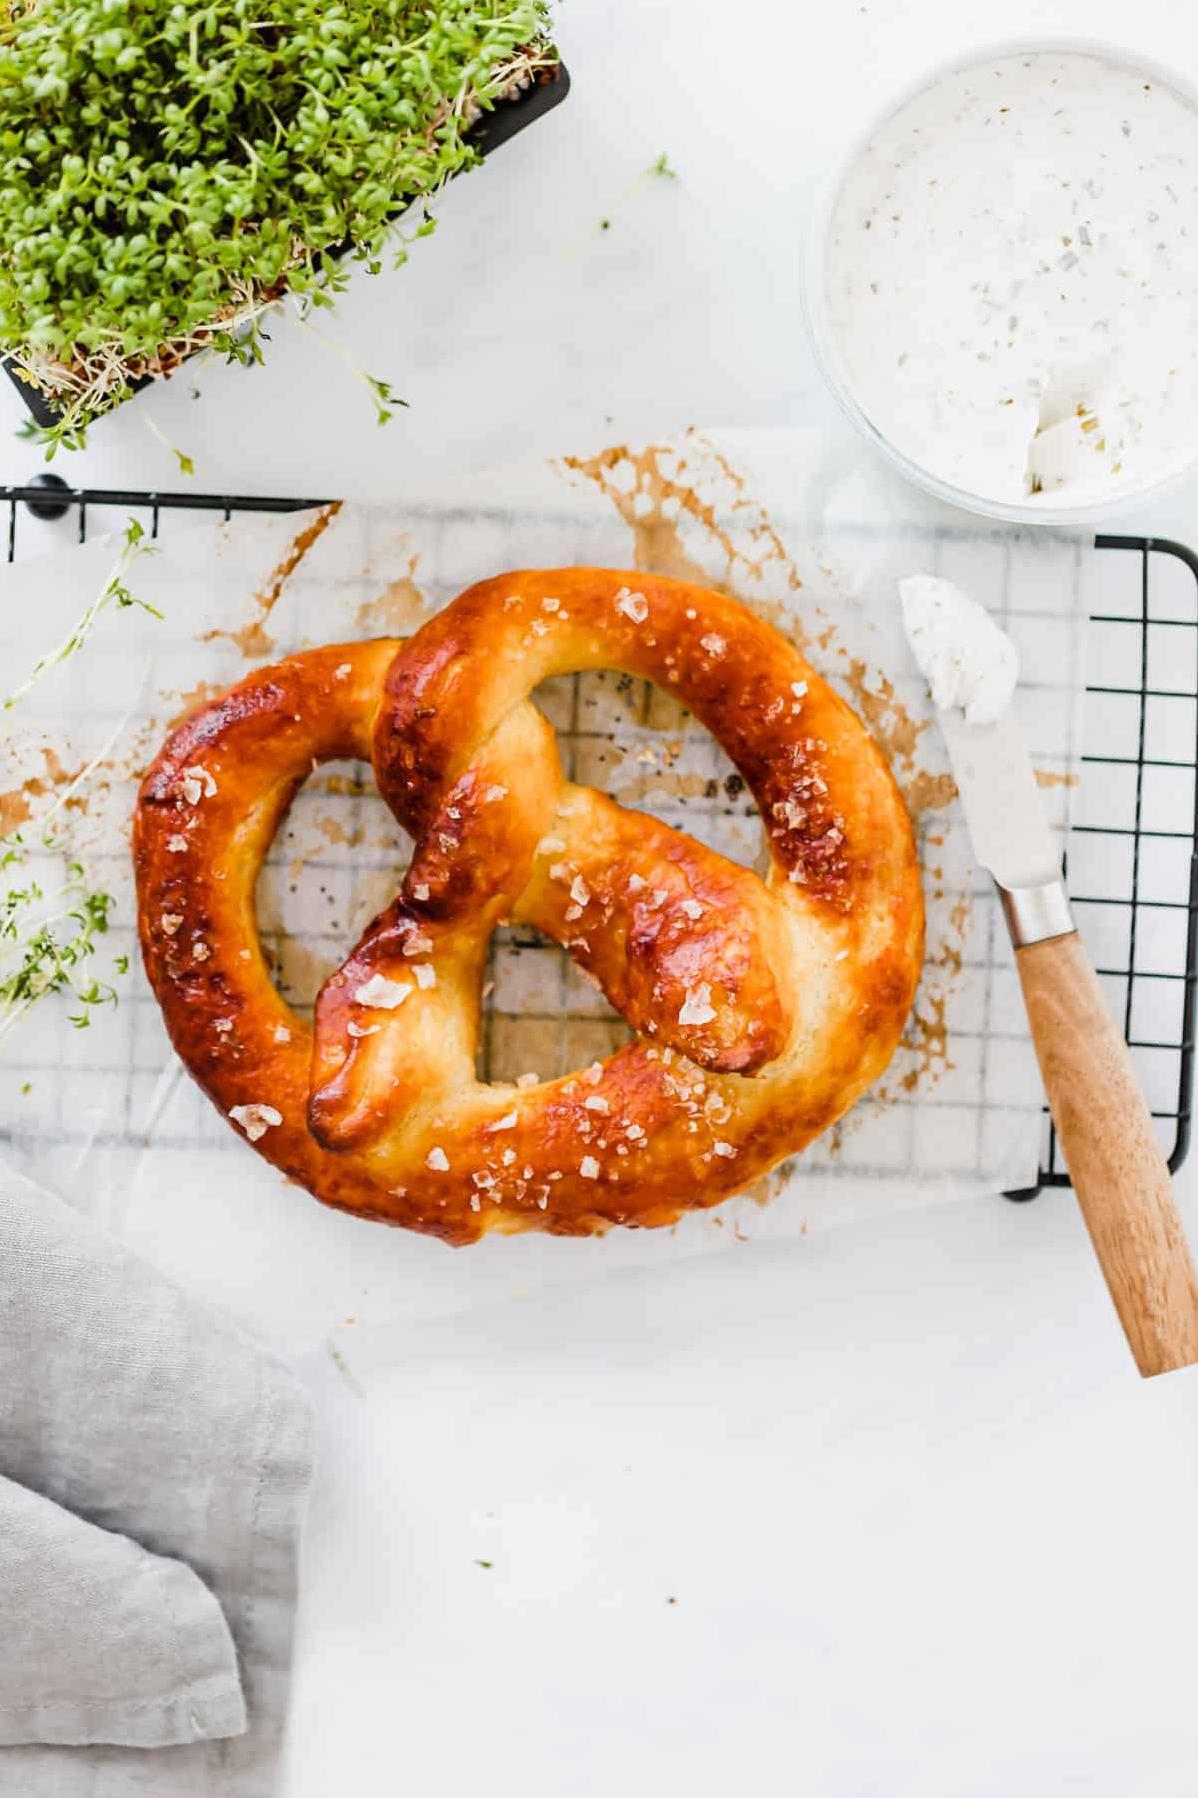  The key to that perfect pretzel texture is a quick trip in a baking soda bath, which gives them that shiny, crispy exterior we all know and love.